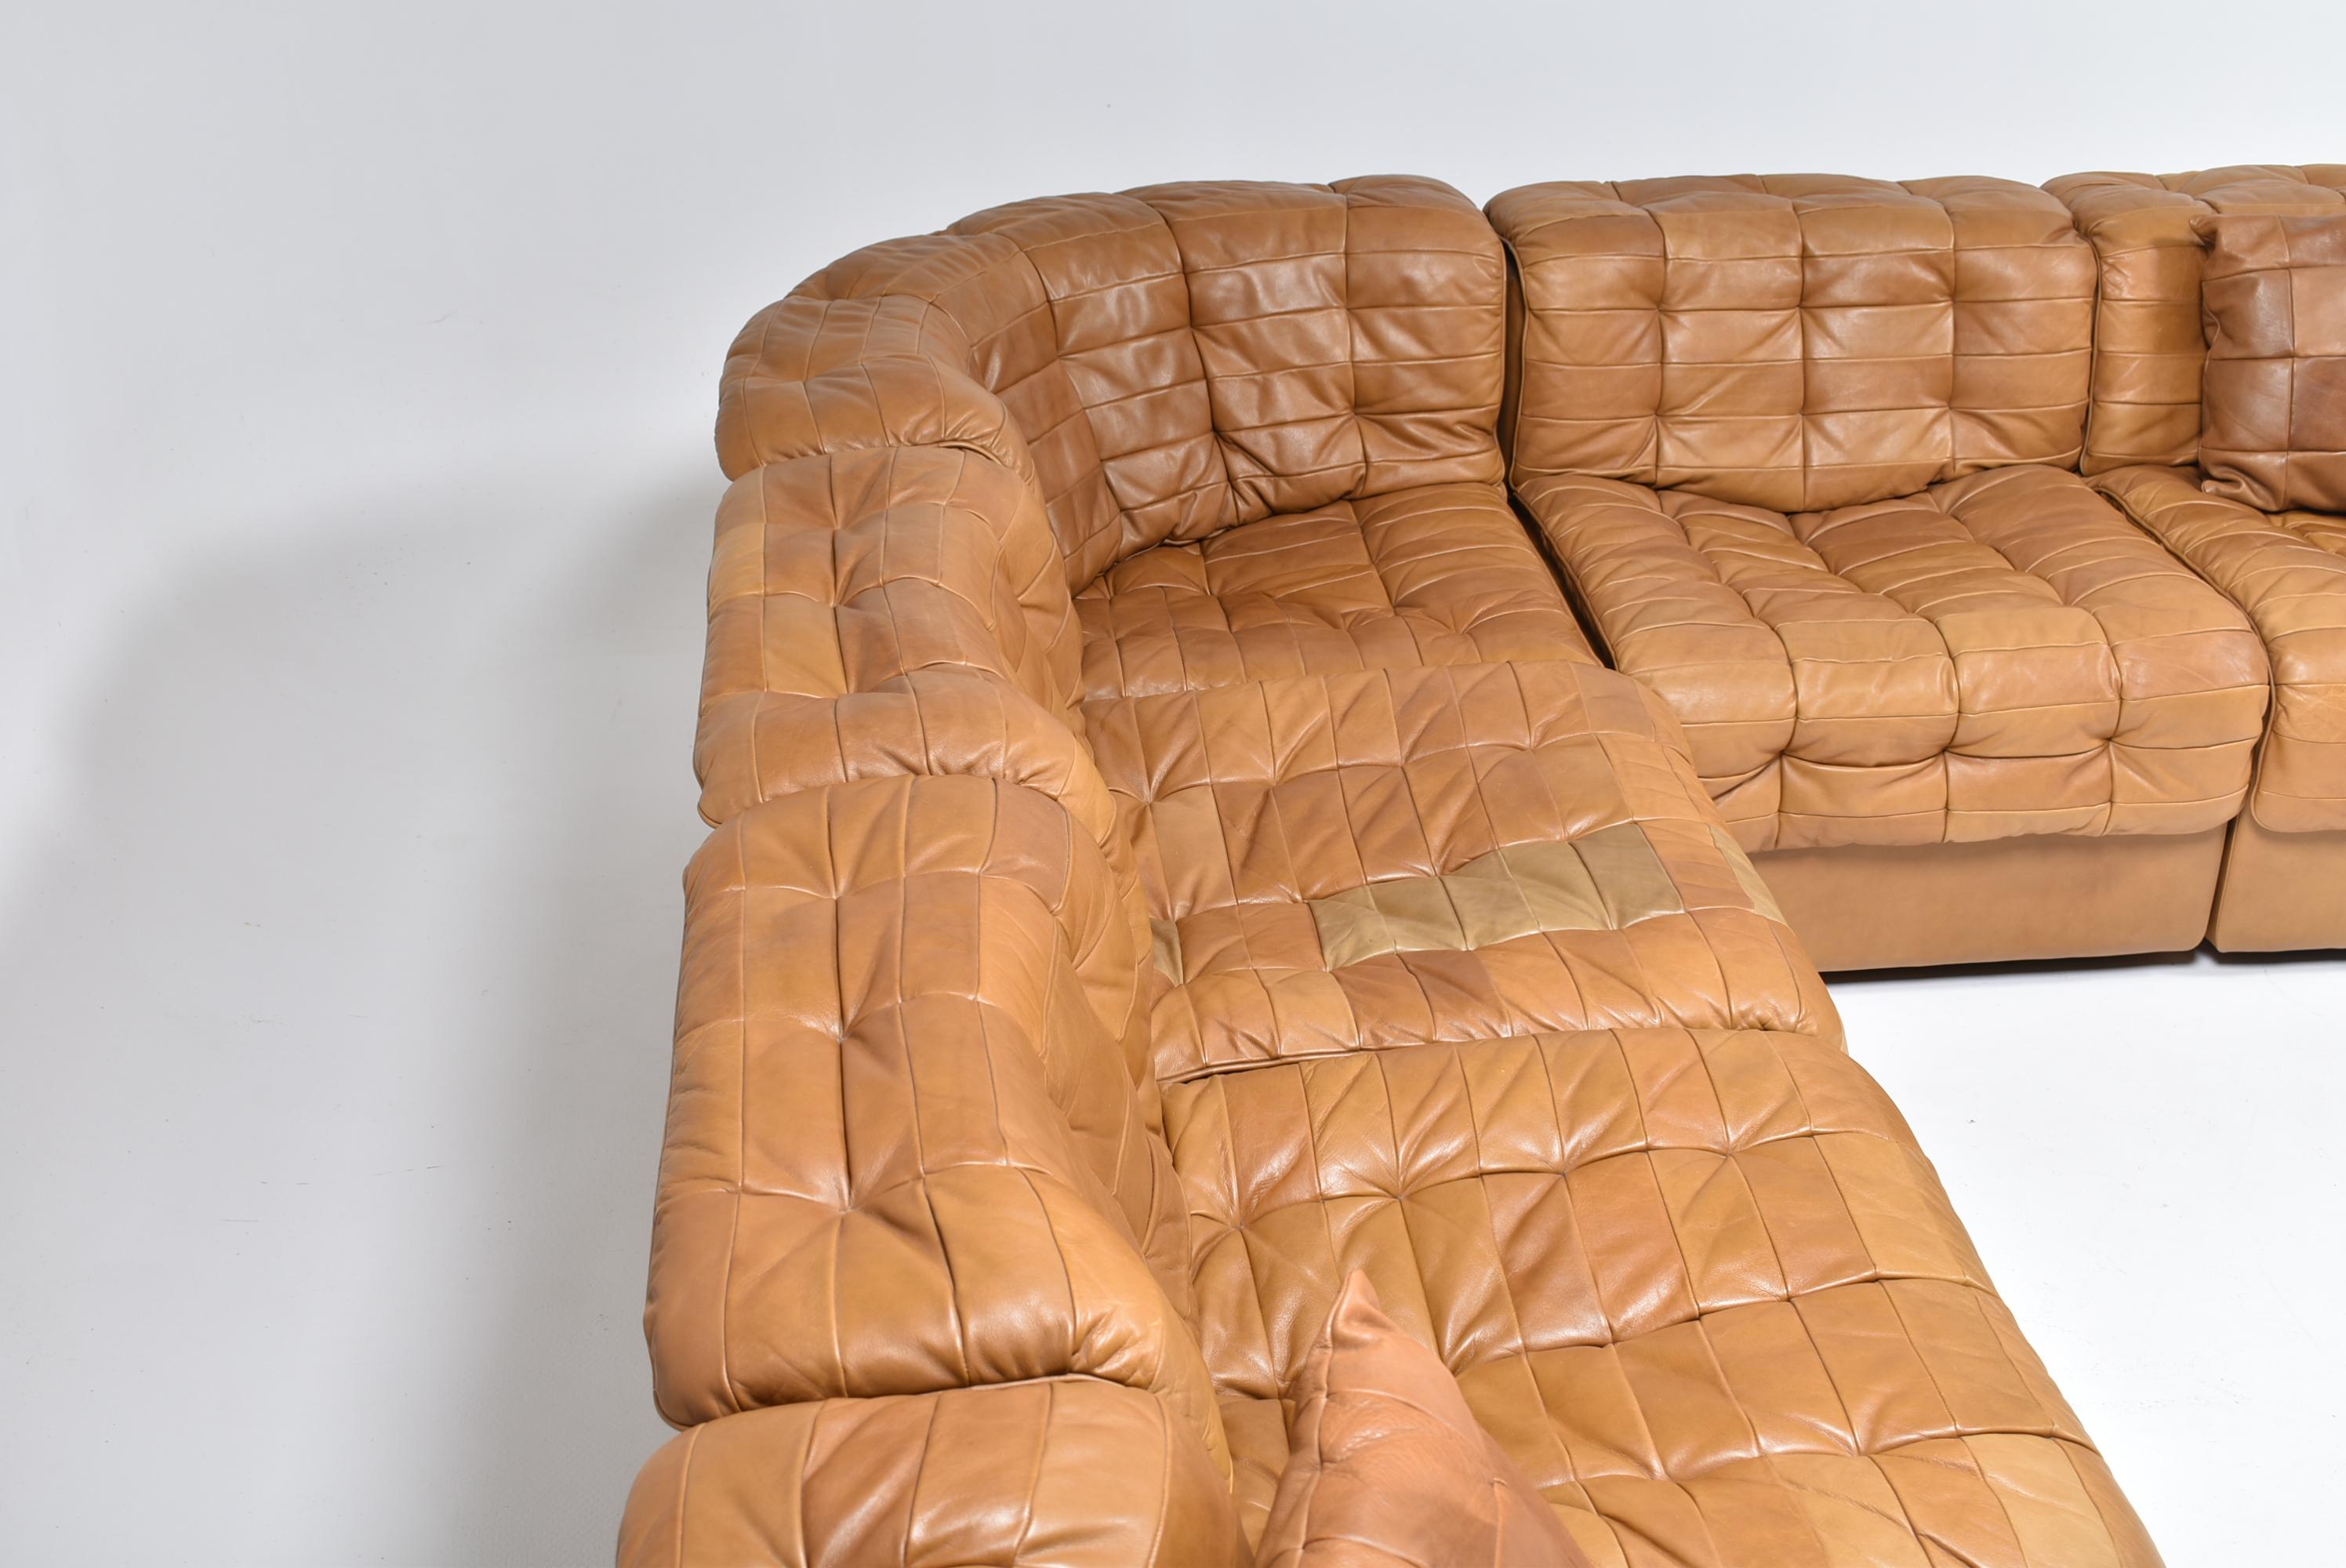 Late 20th Century De Sede DS 11 Sectional Patchwork Sofa in Camel Leather, Switzerland, 1975